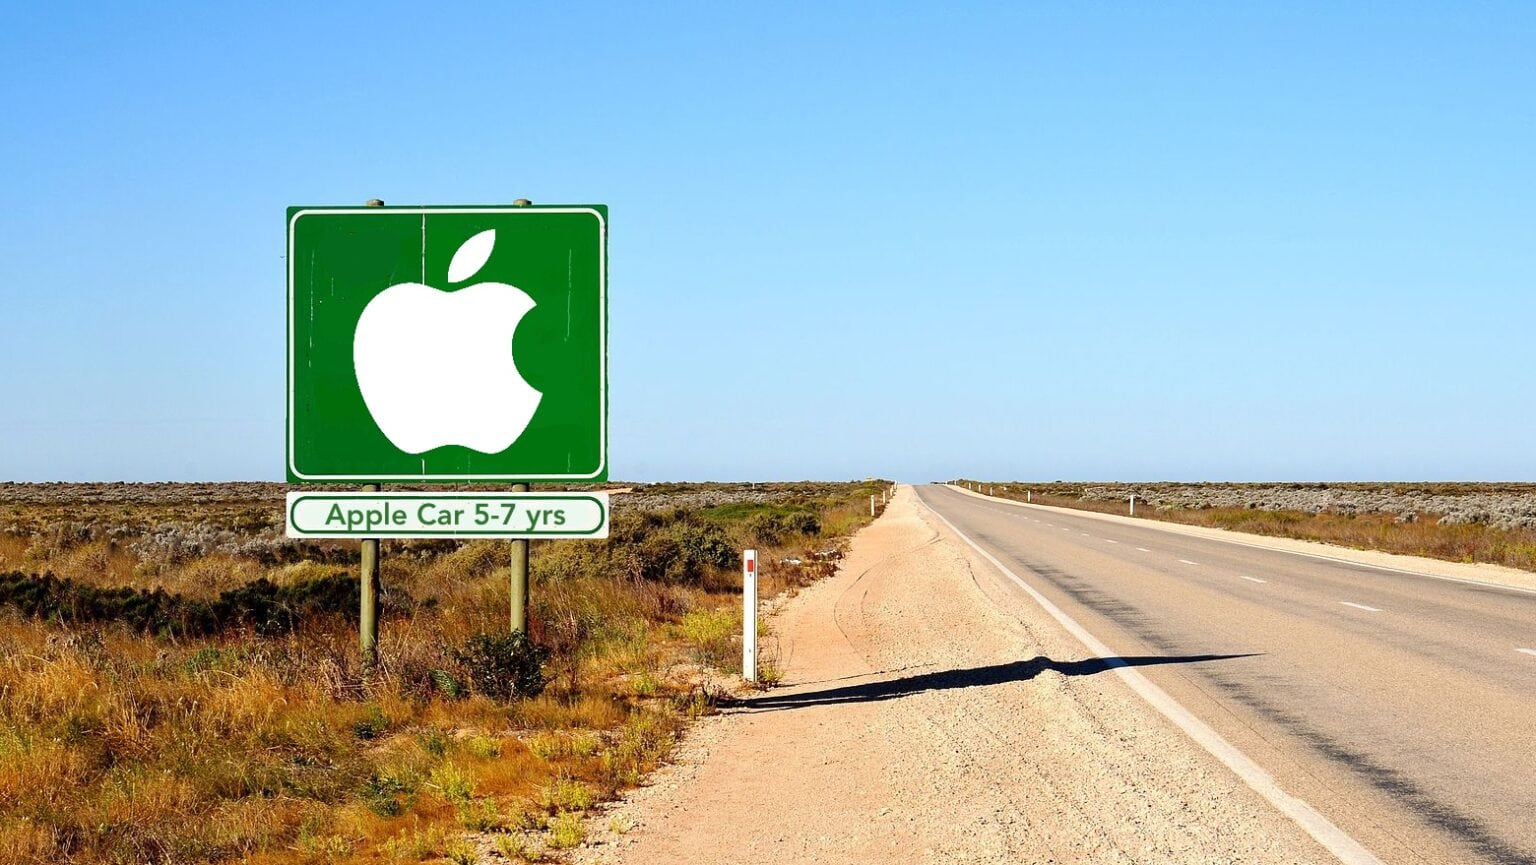 That's the signpost up ahead - your next stop, the Apple Car. The Apple Car is way down the highway. But Apple has the pedal to the metal.